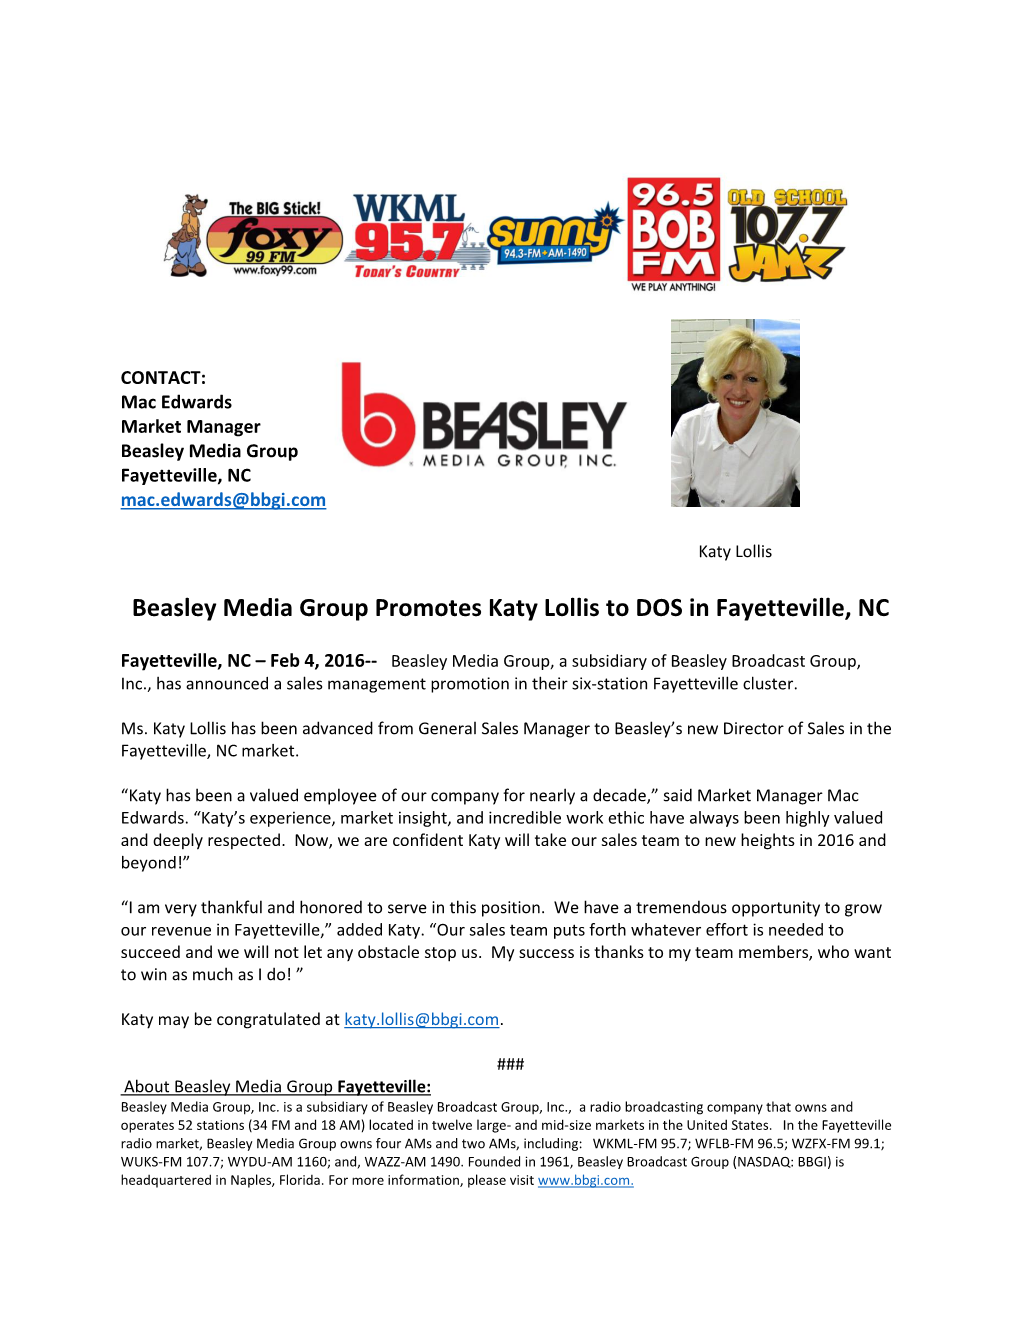 Beasley Media Group Promotes Katy Lollis to DOS in Fayetteville, NC